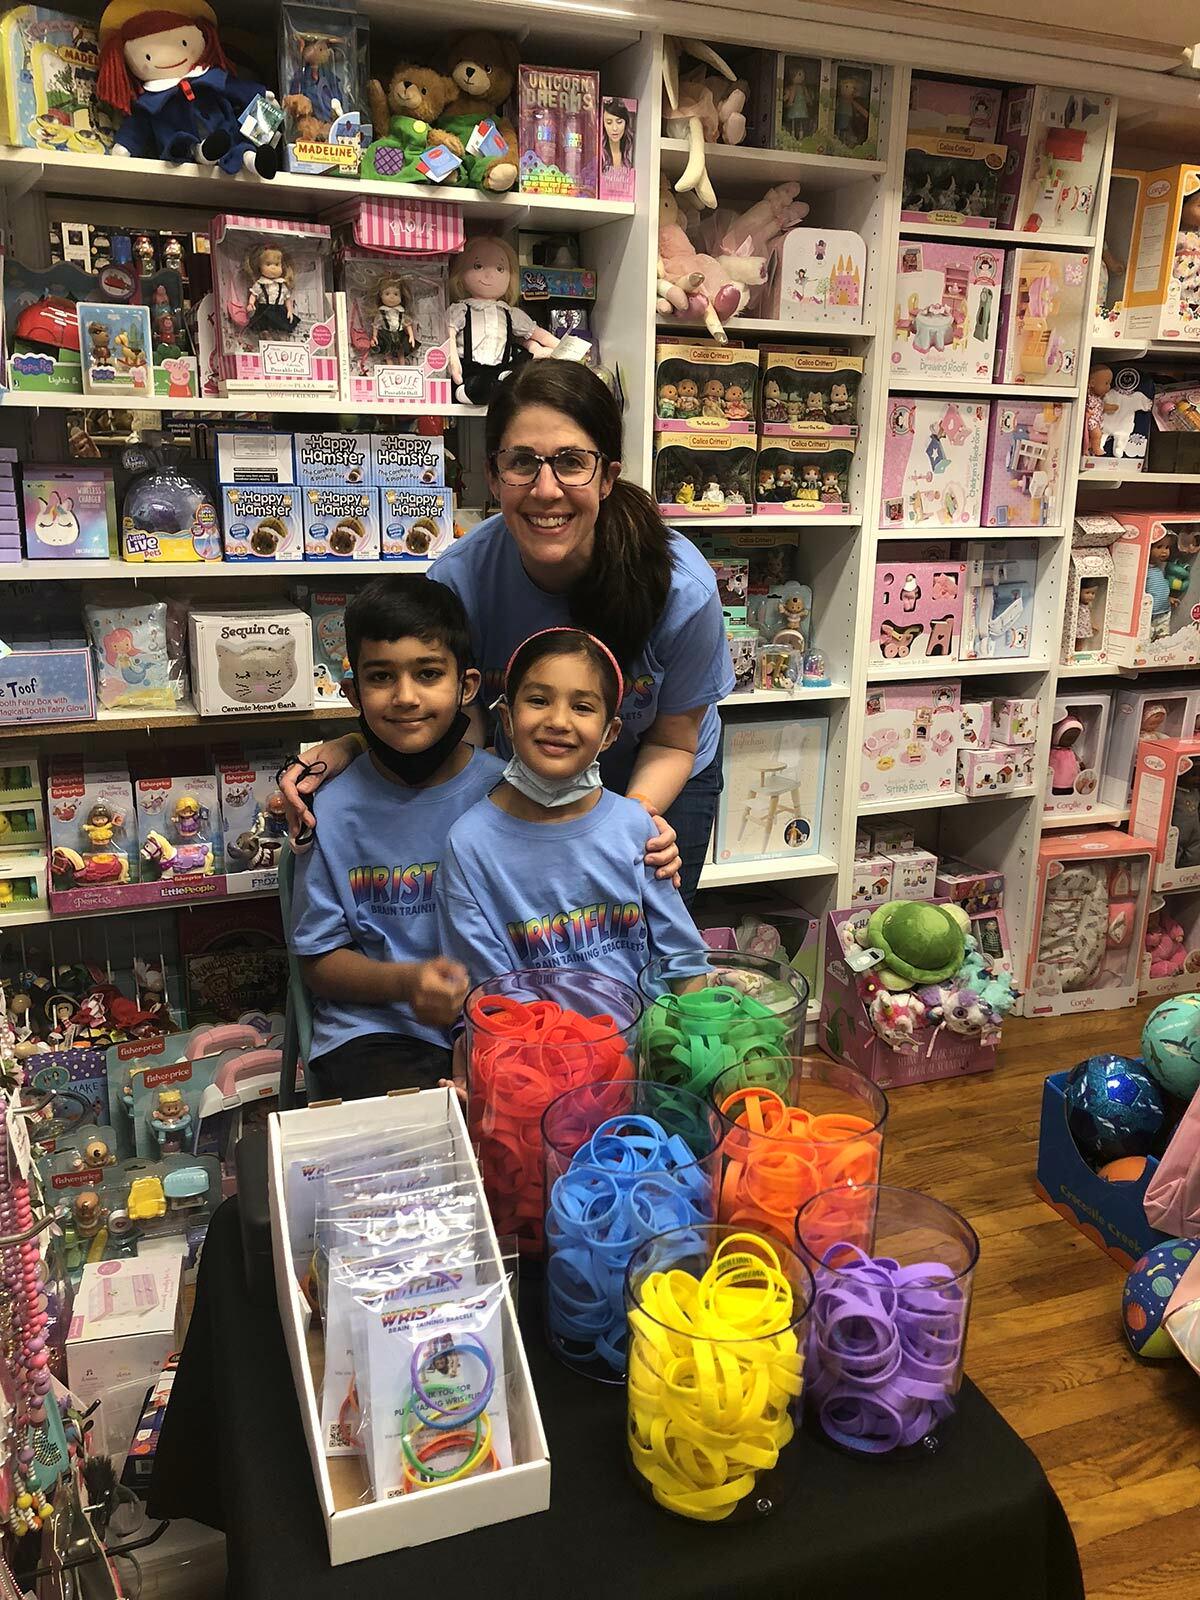 Northport resident Leigh Boodoo and her children at a Wristflips pop-up event at Einstein’s Attic on Main Street last weekend.